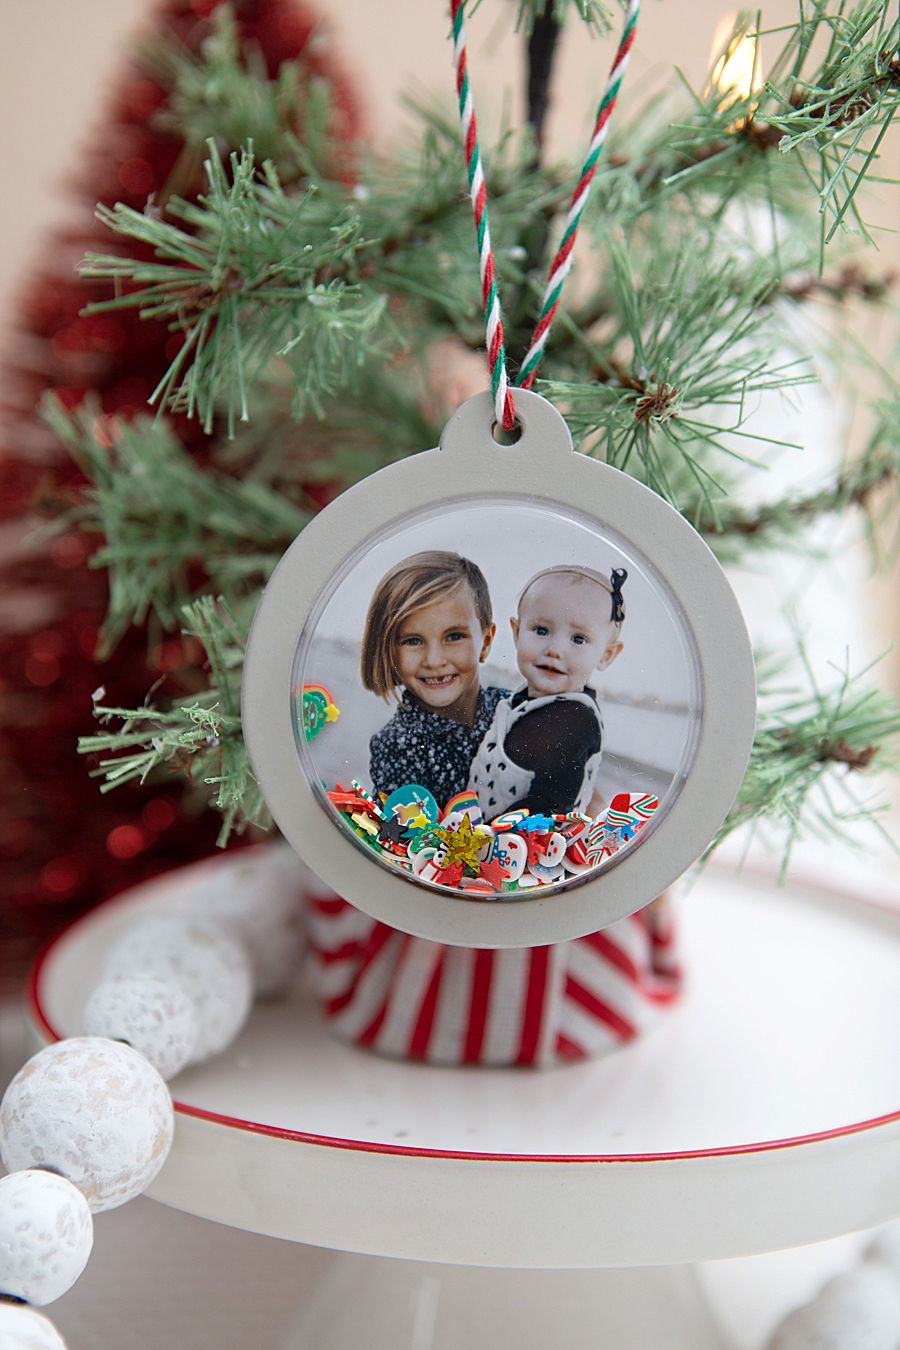 My Canon SELPHY printed all the photos for these shaker ornaments!